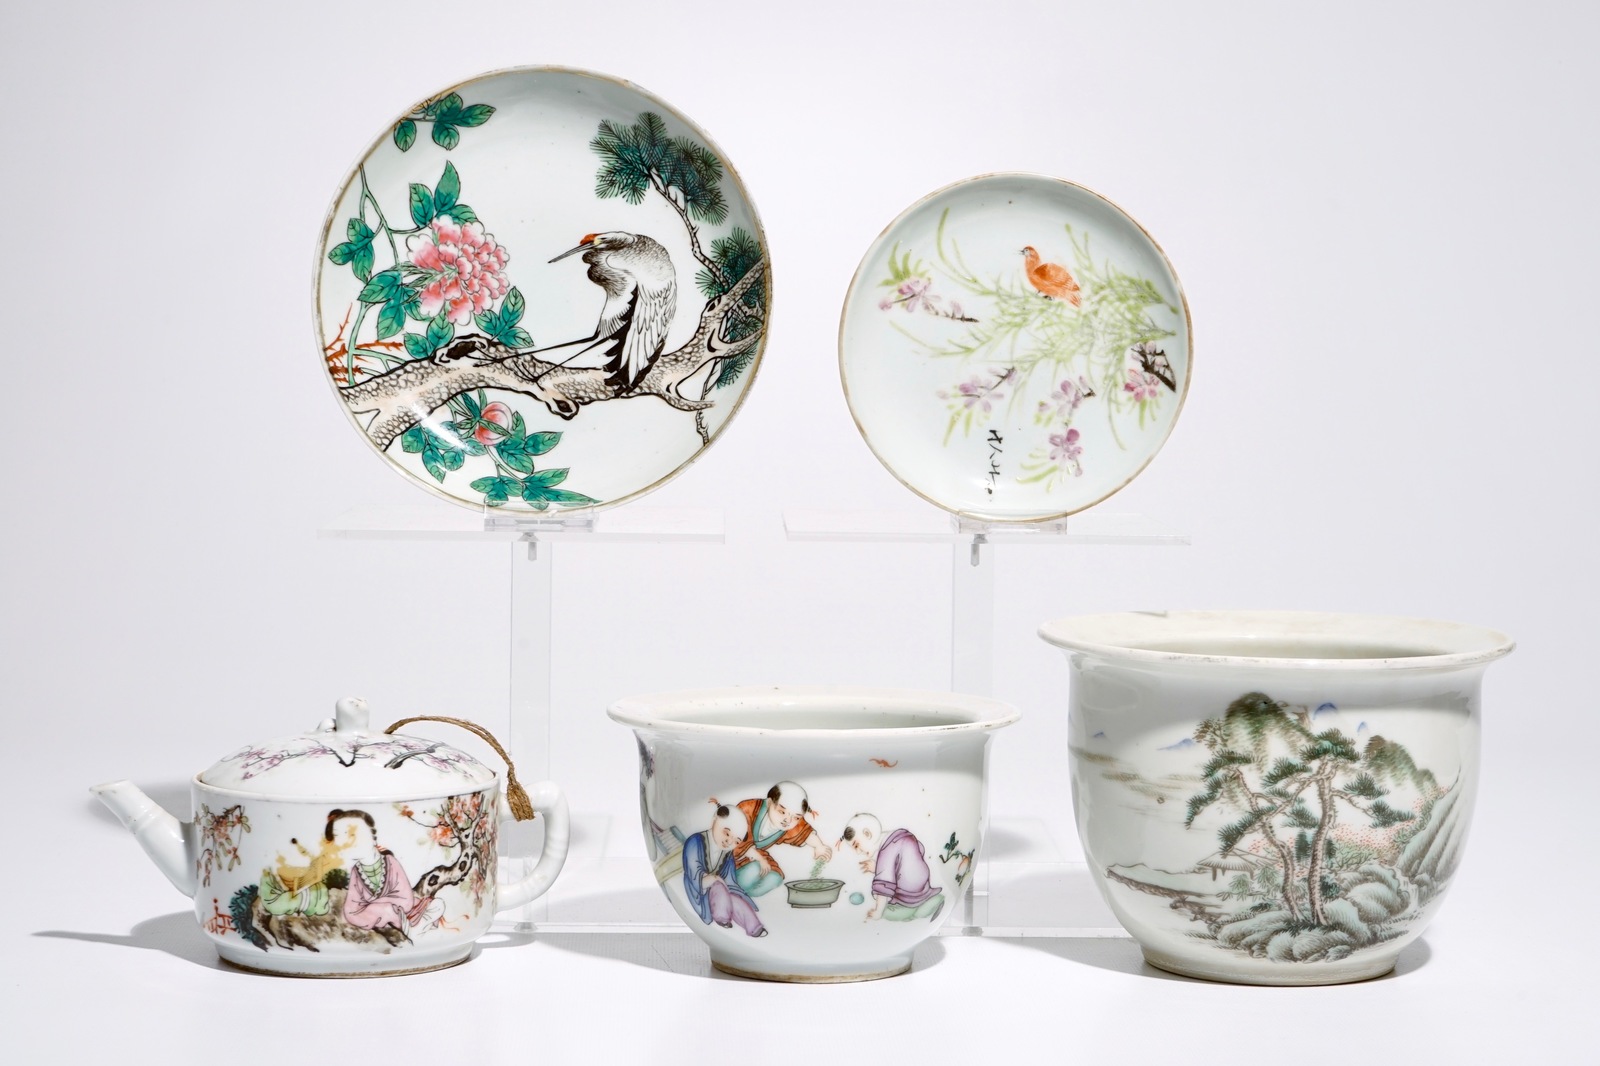 A varied lot of Chinese qianjiang cai porcelain, 19/20th C. Dia.: 17 cm - H.: 12 cm (largest bowl)